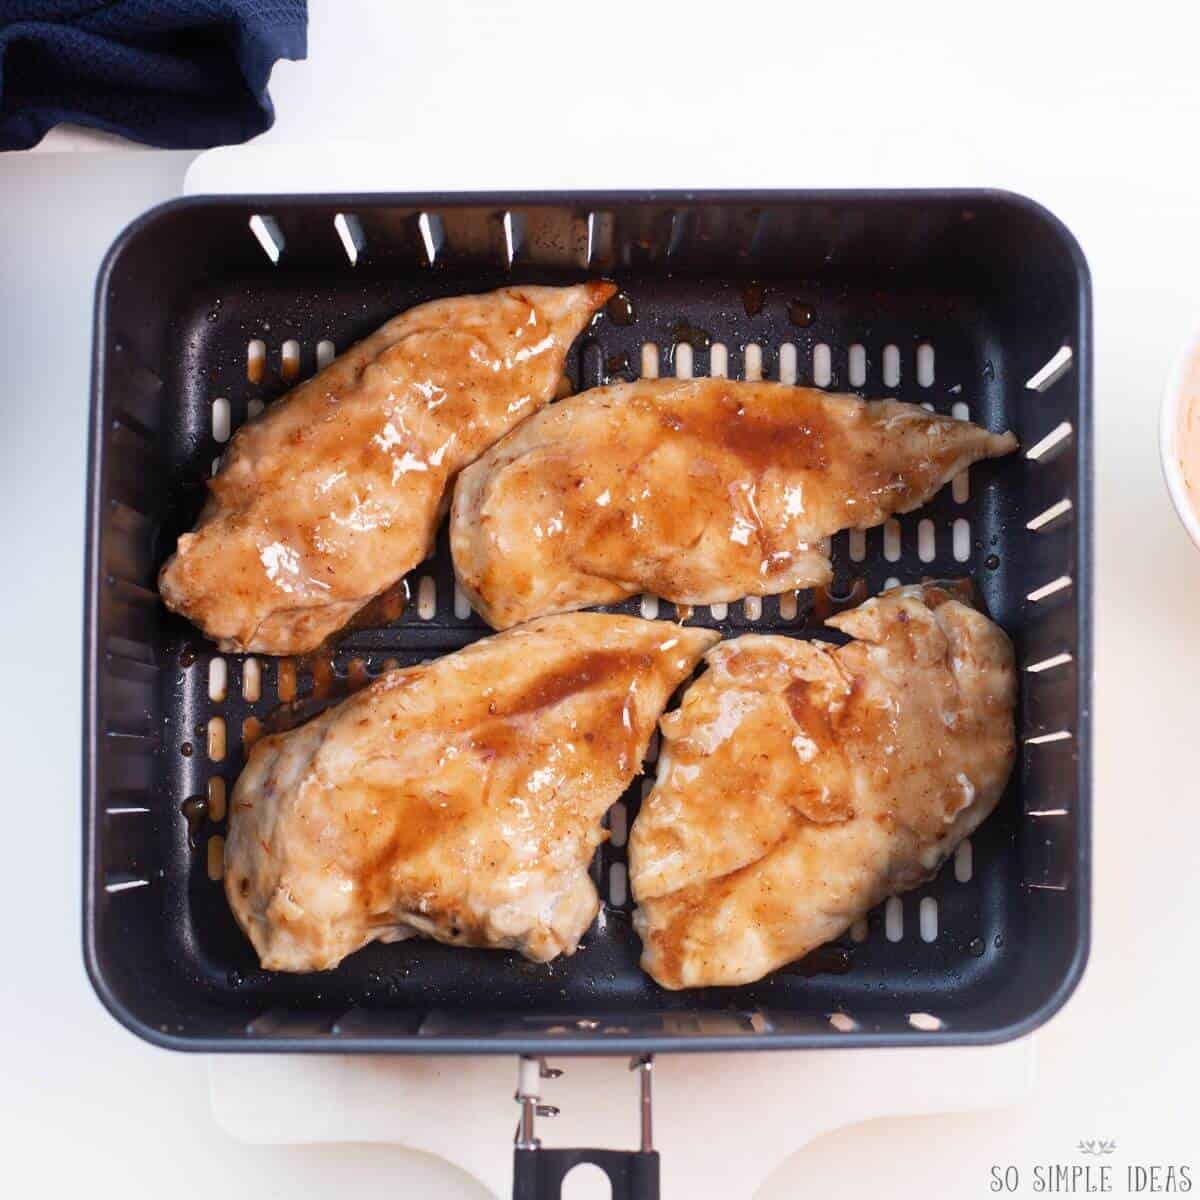 adding sauce to breast meat in air fryer basket.